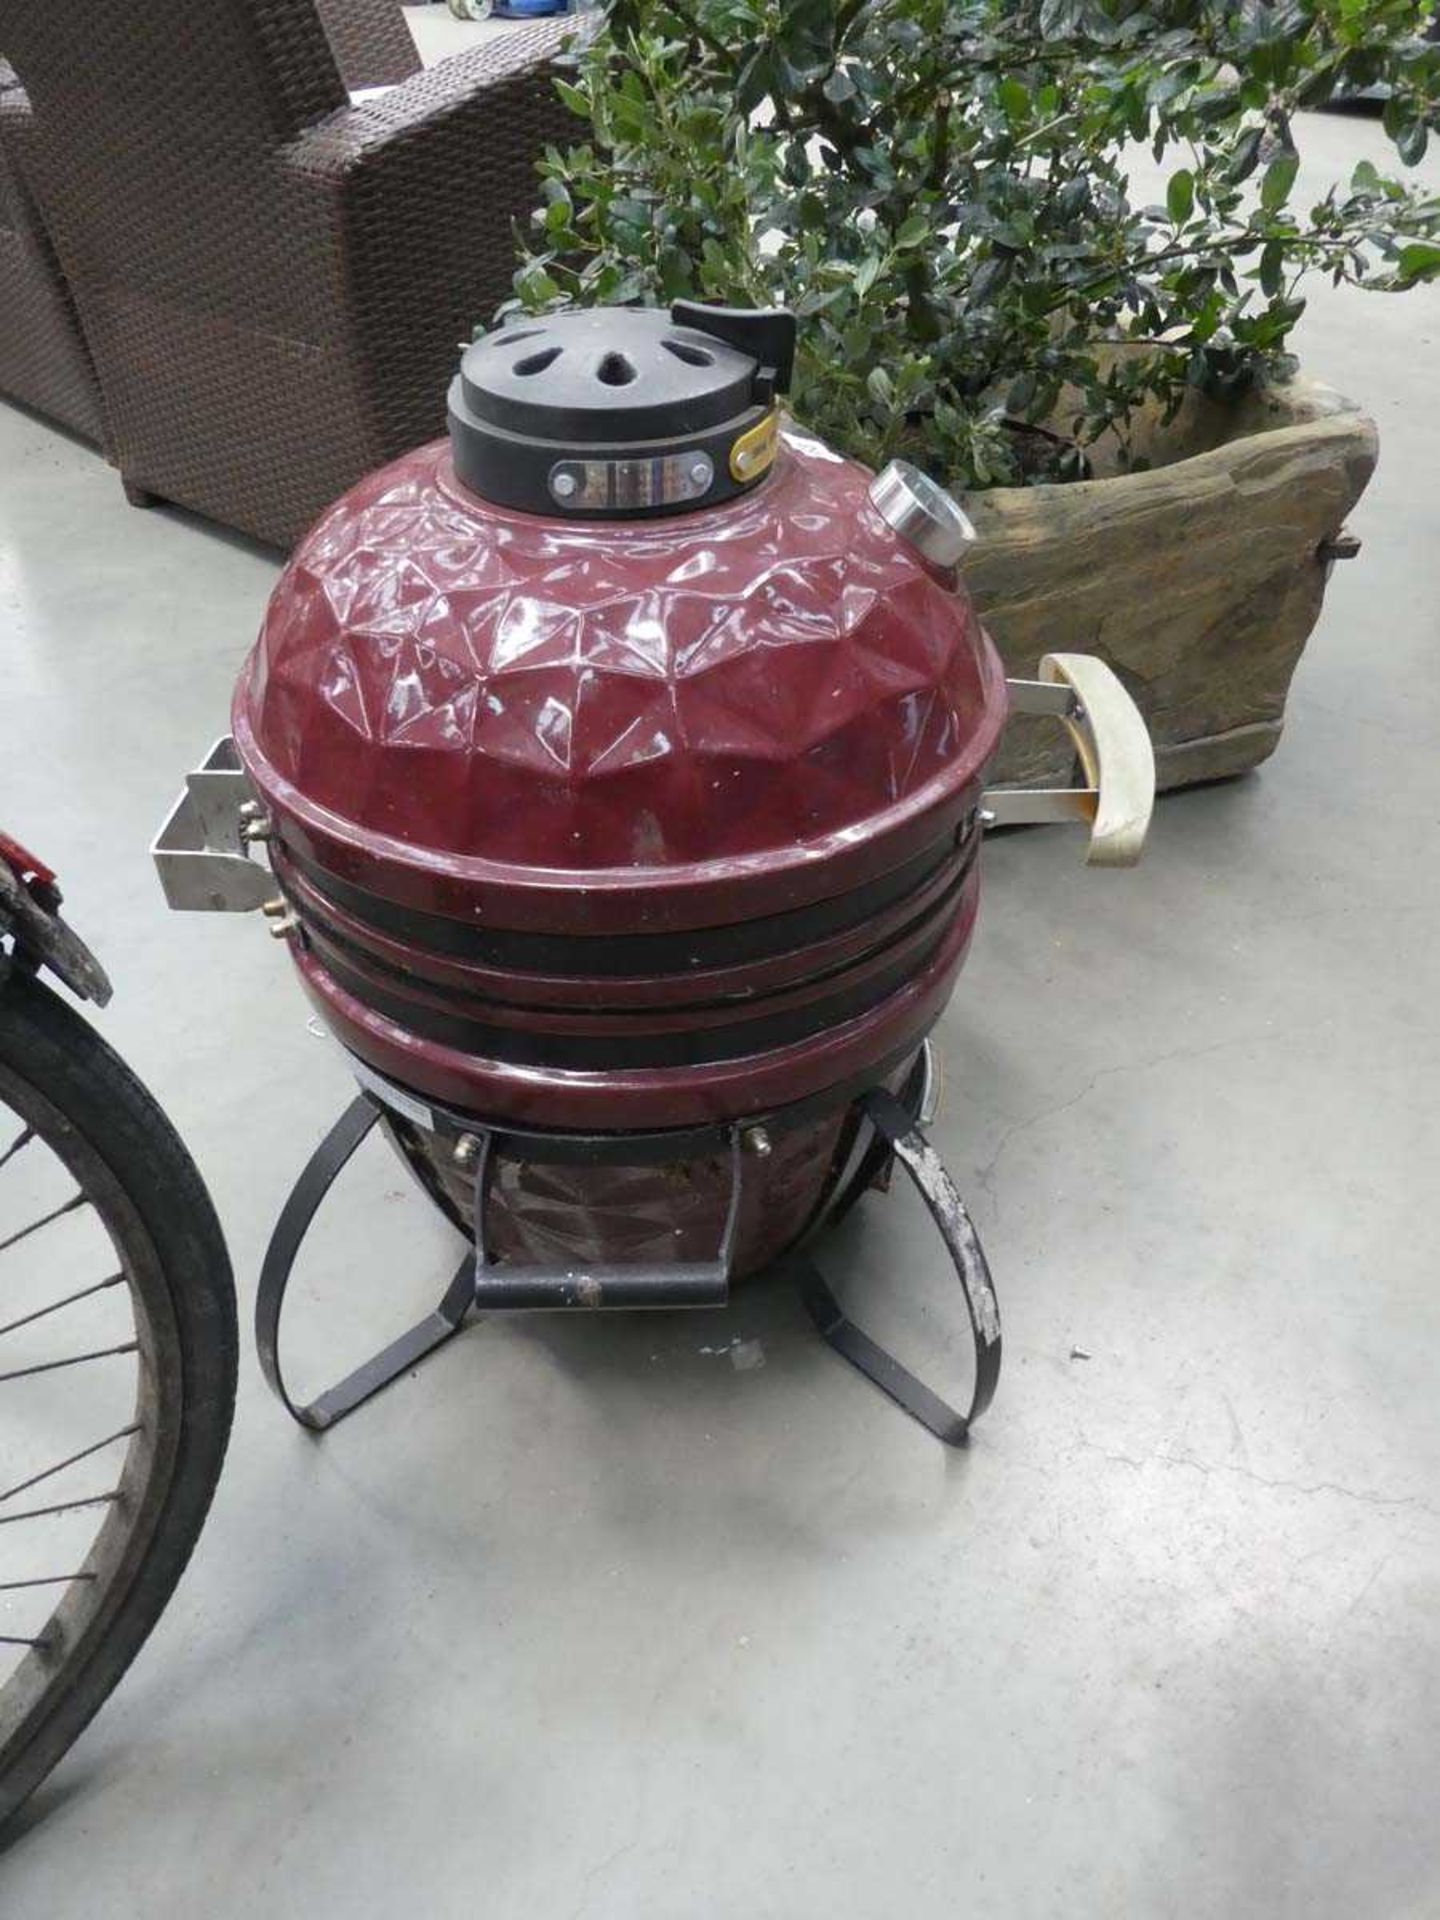 Ceramic charcoal barbeque in burgundy